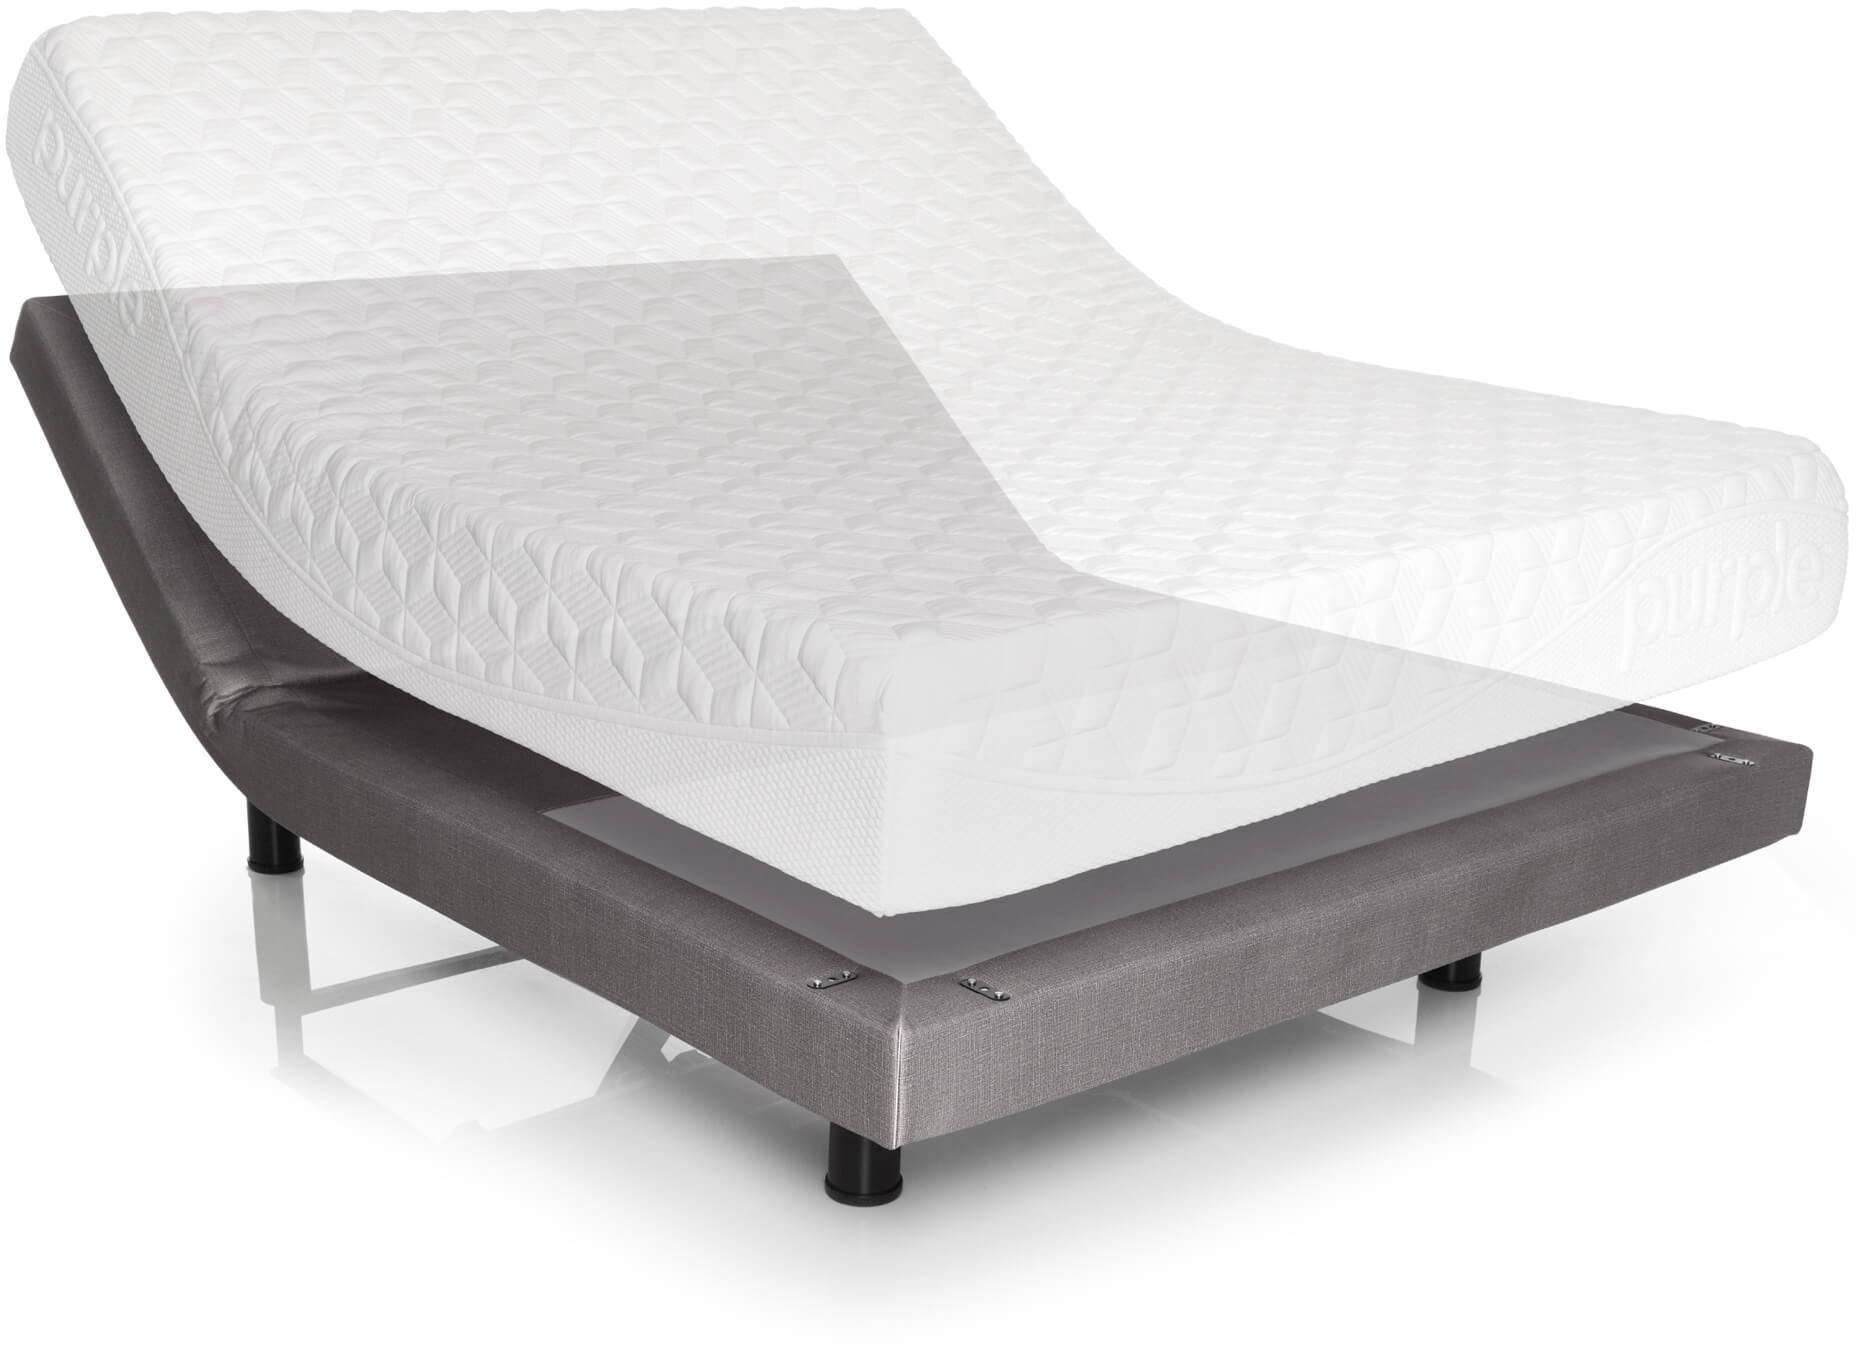 7 Best Bed Frames &  Foundations for Purple Mattress (2020)